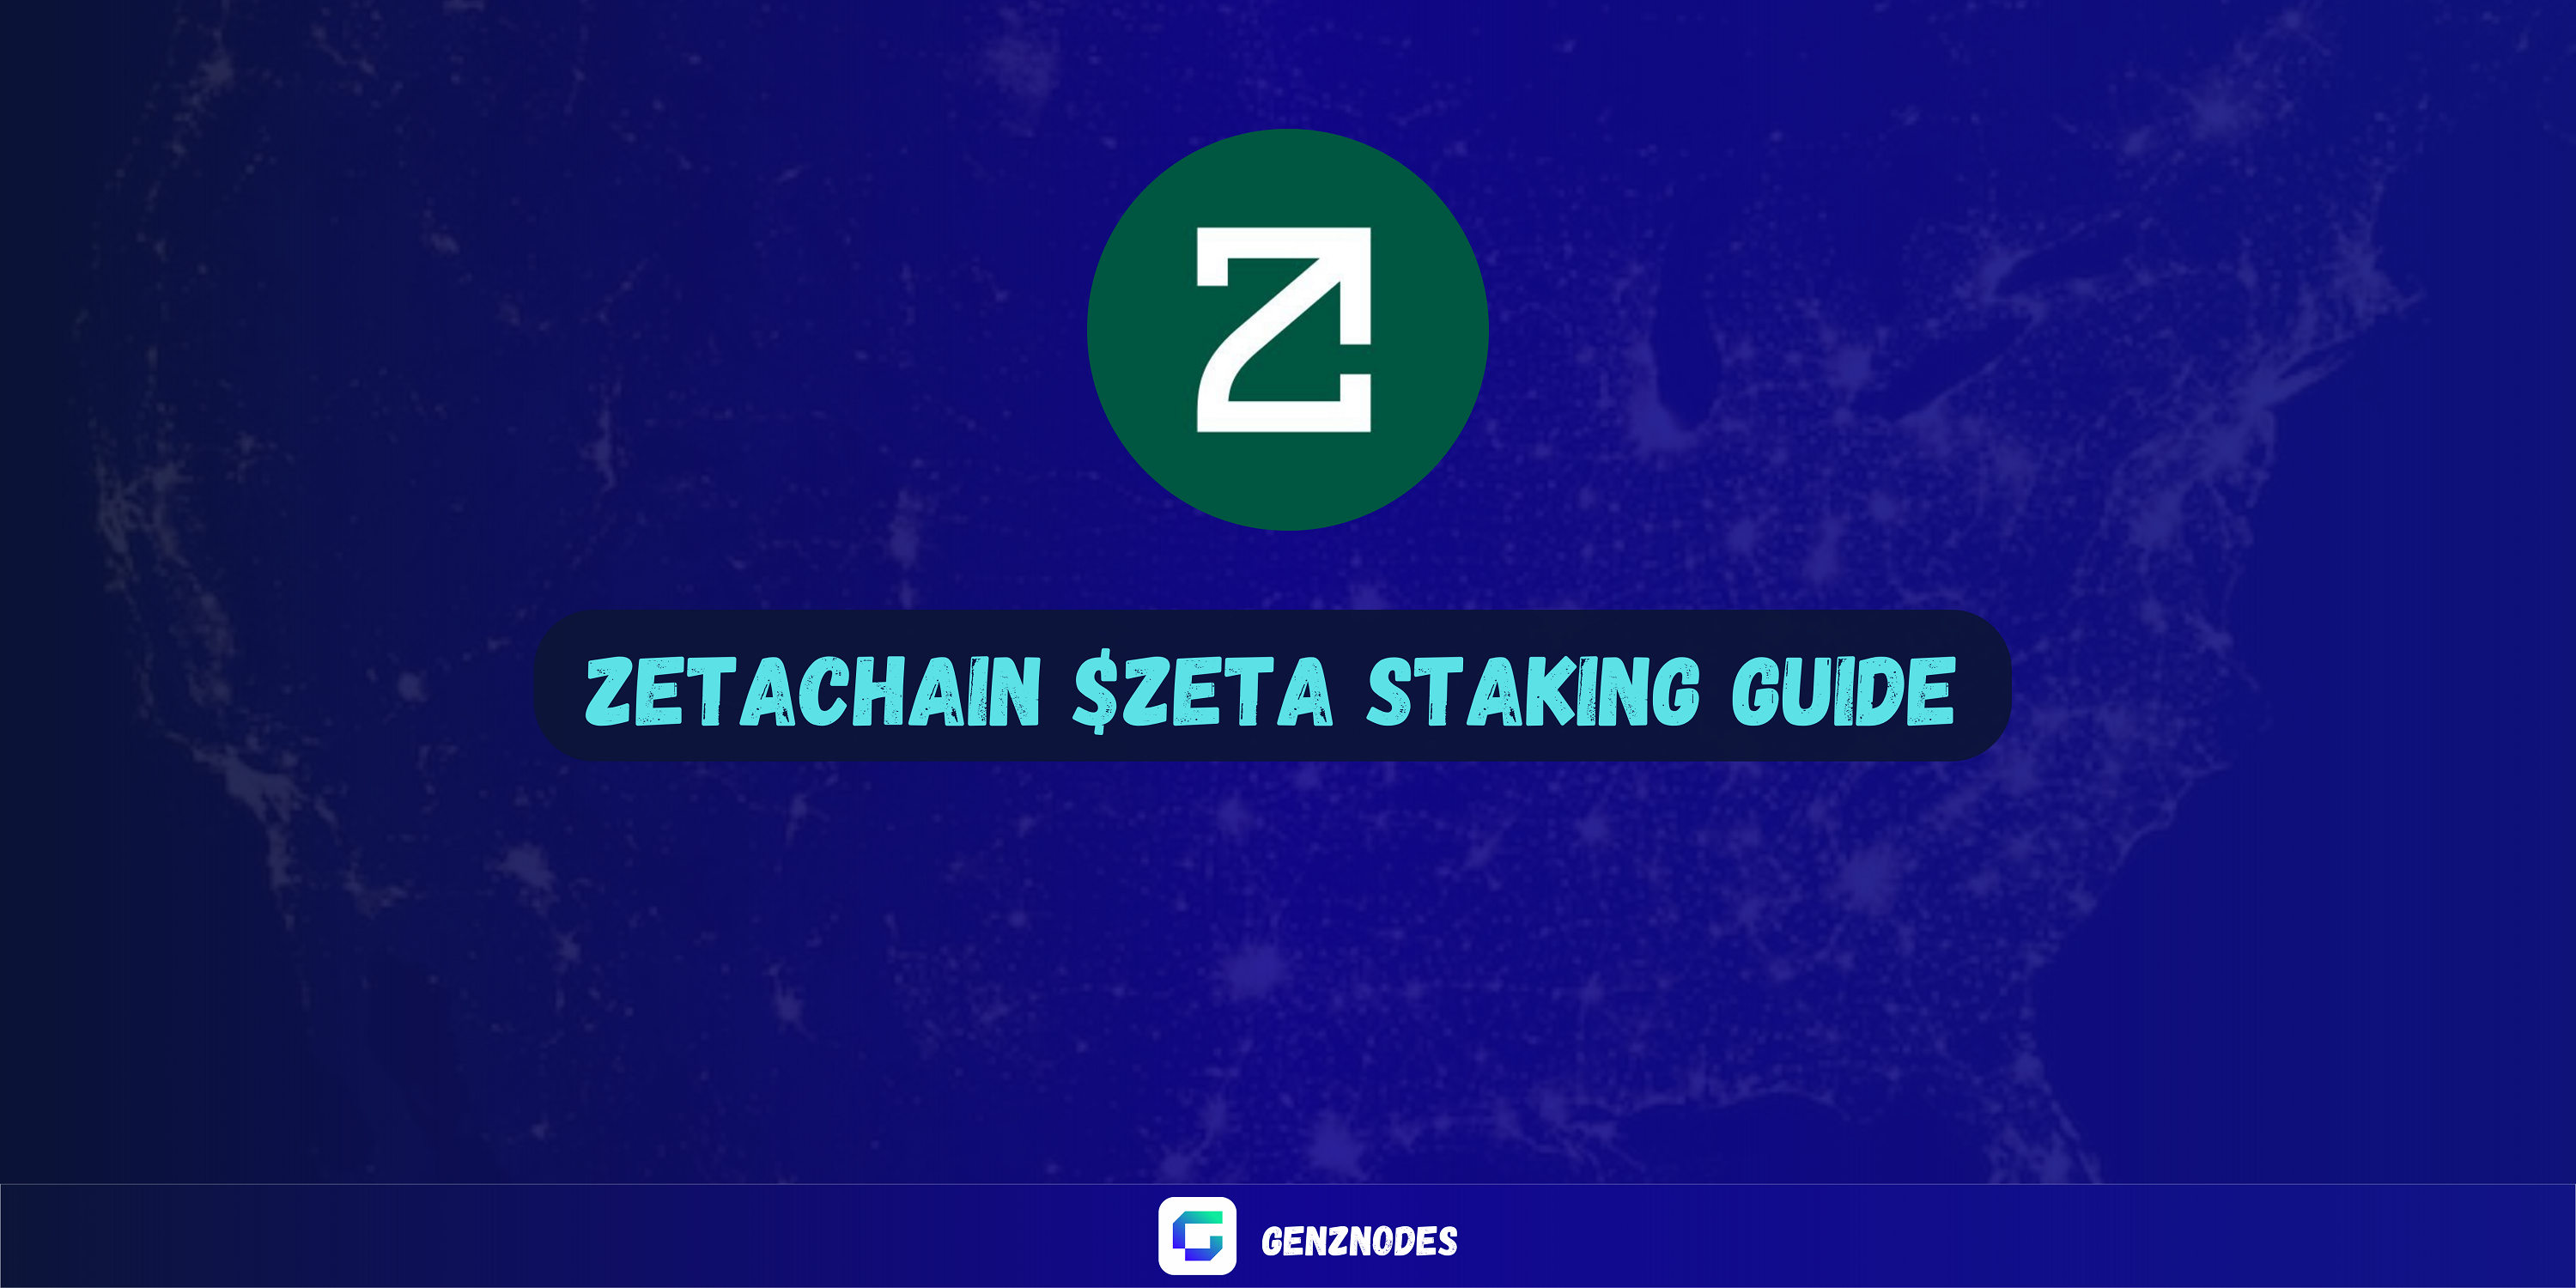 Guide to delegate/stake $ZETA, participate to help secure the network, become a governance member, and earn staking rewards.